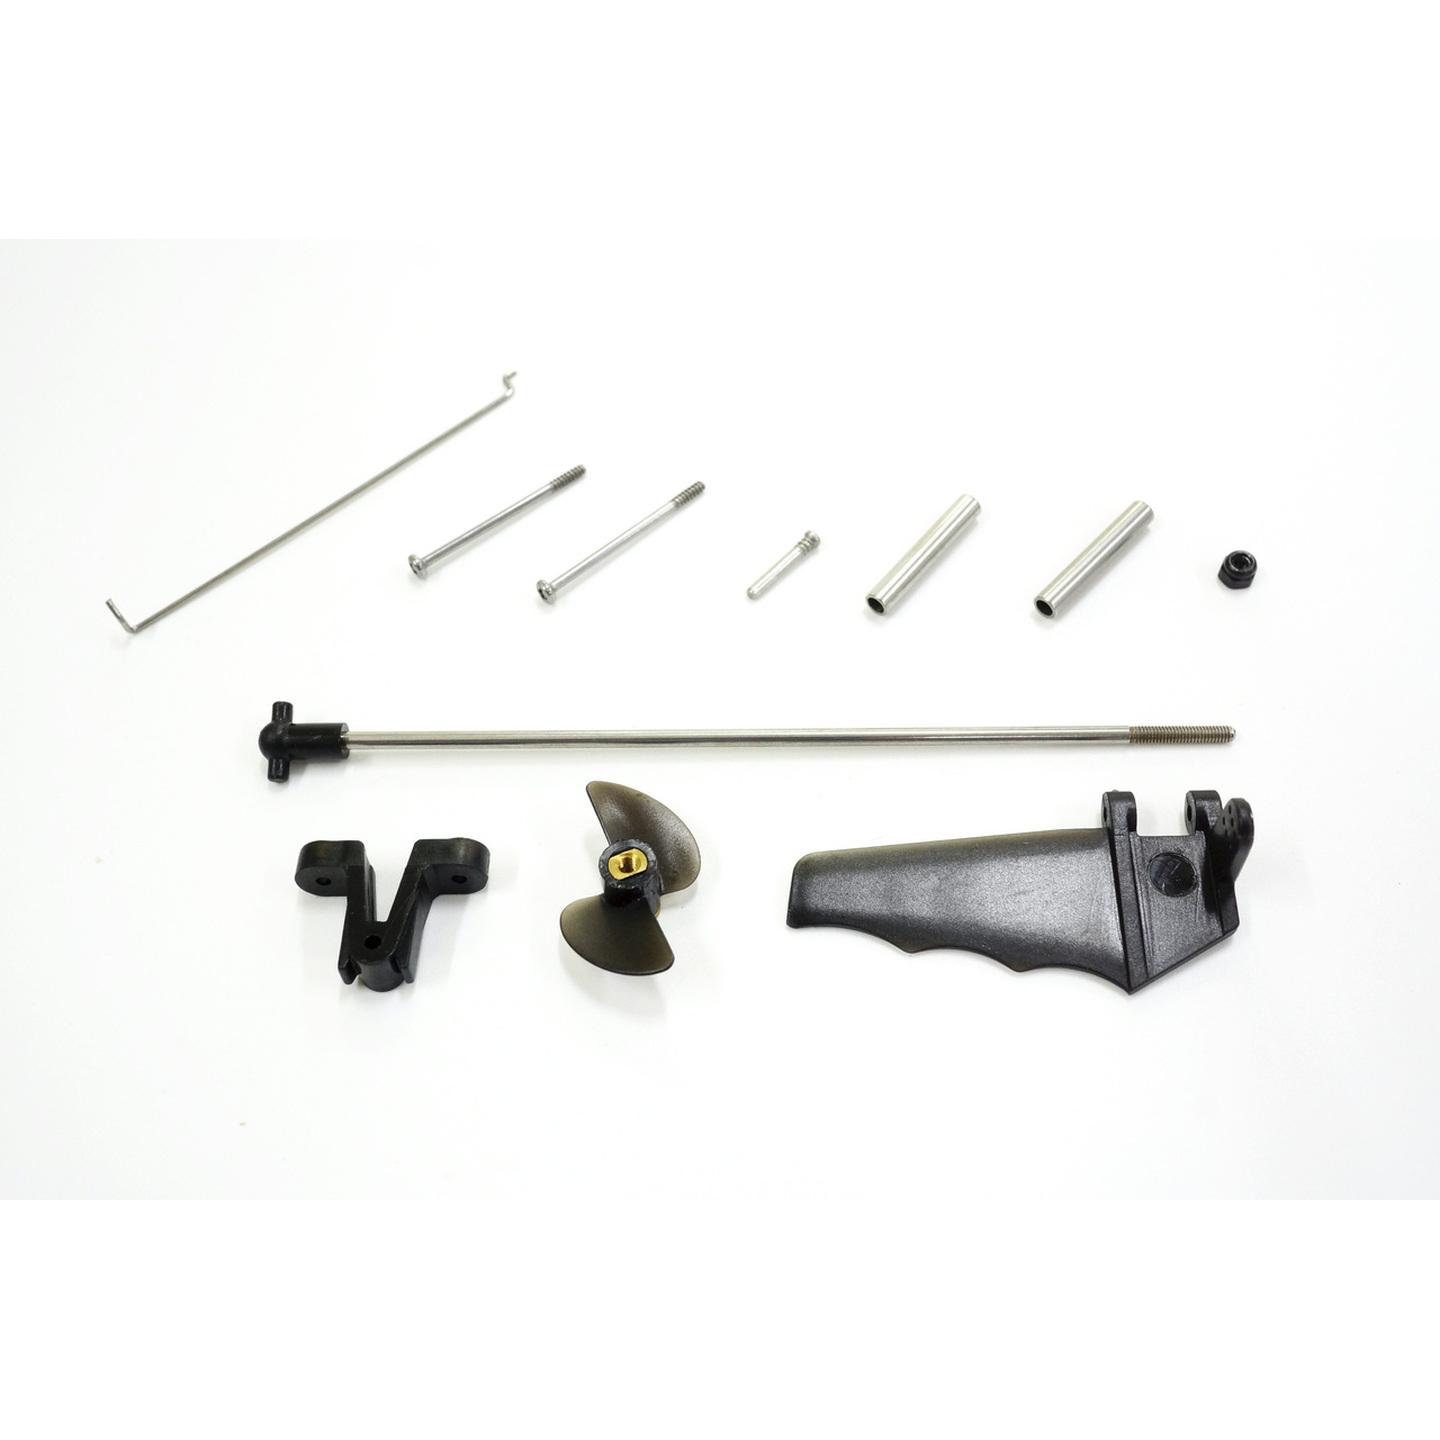 Spare Rudder Pipe and Propeller Kit to Suit GT3615 Racing Boat